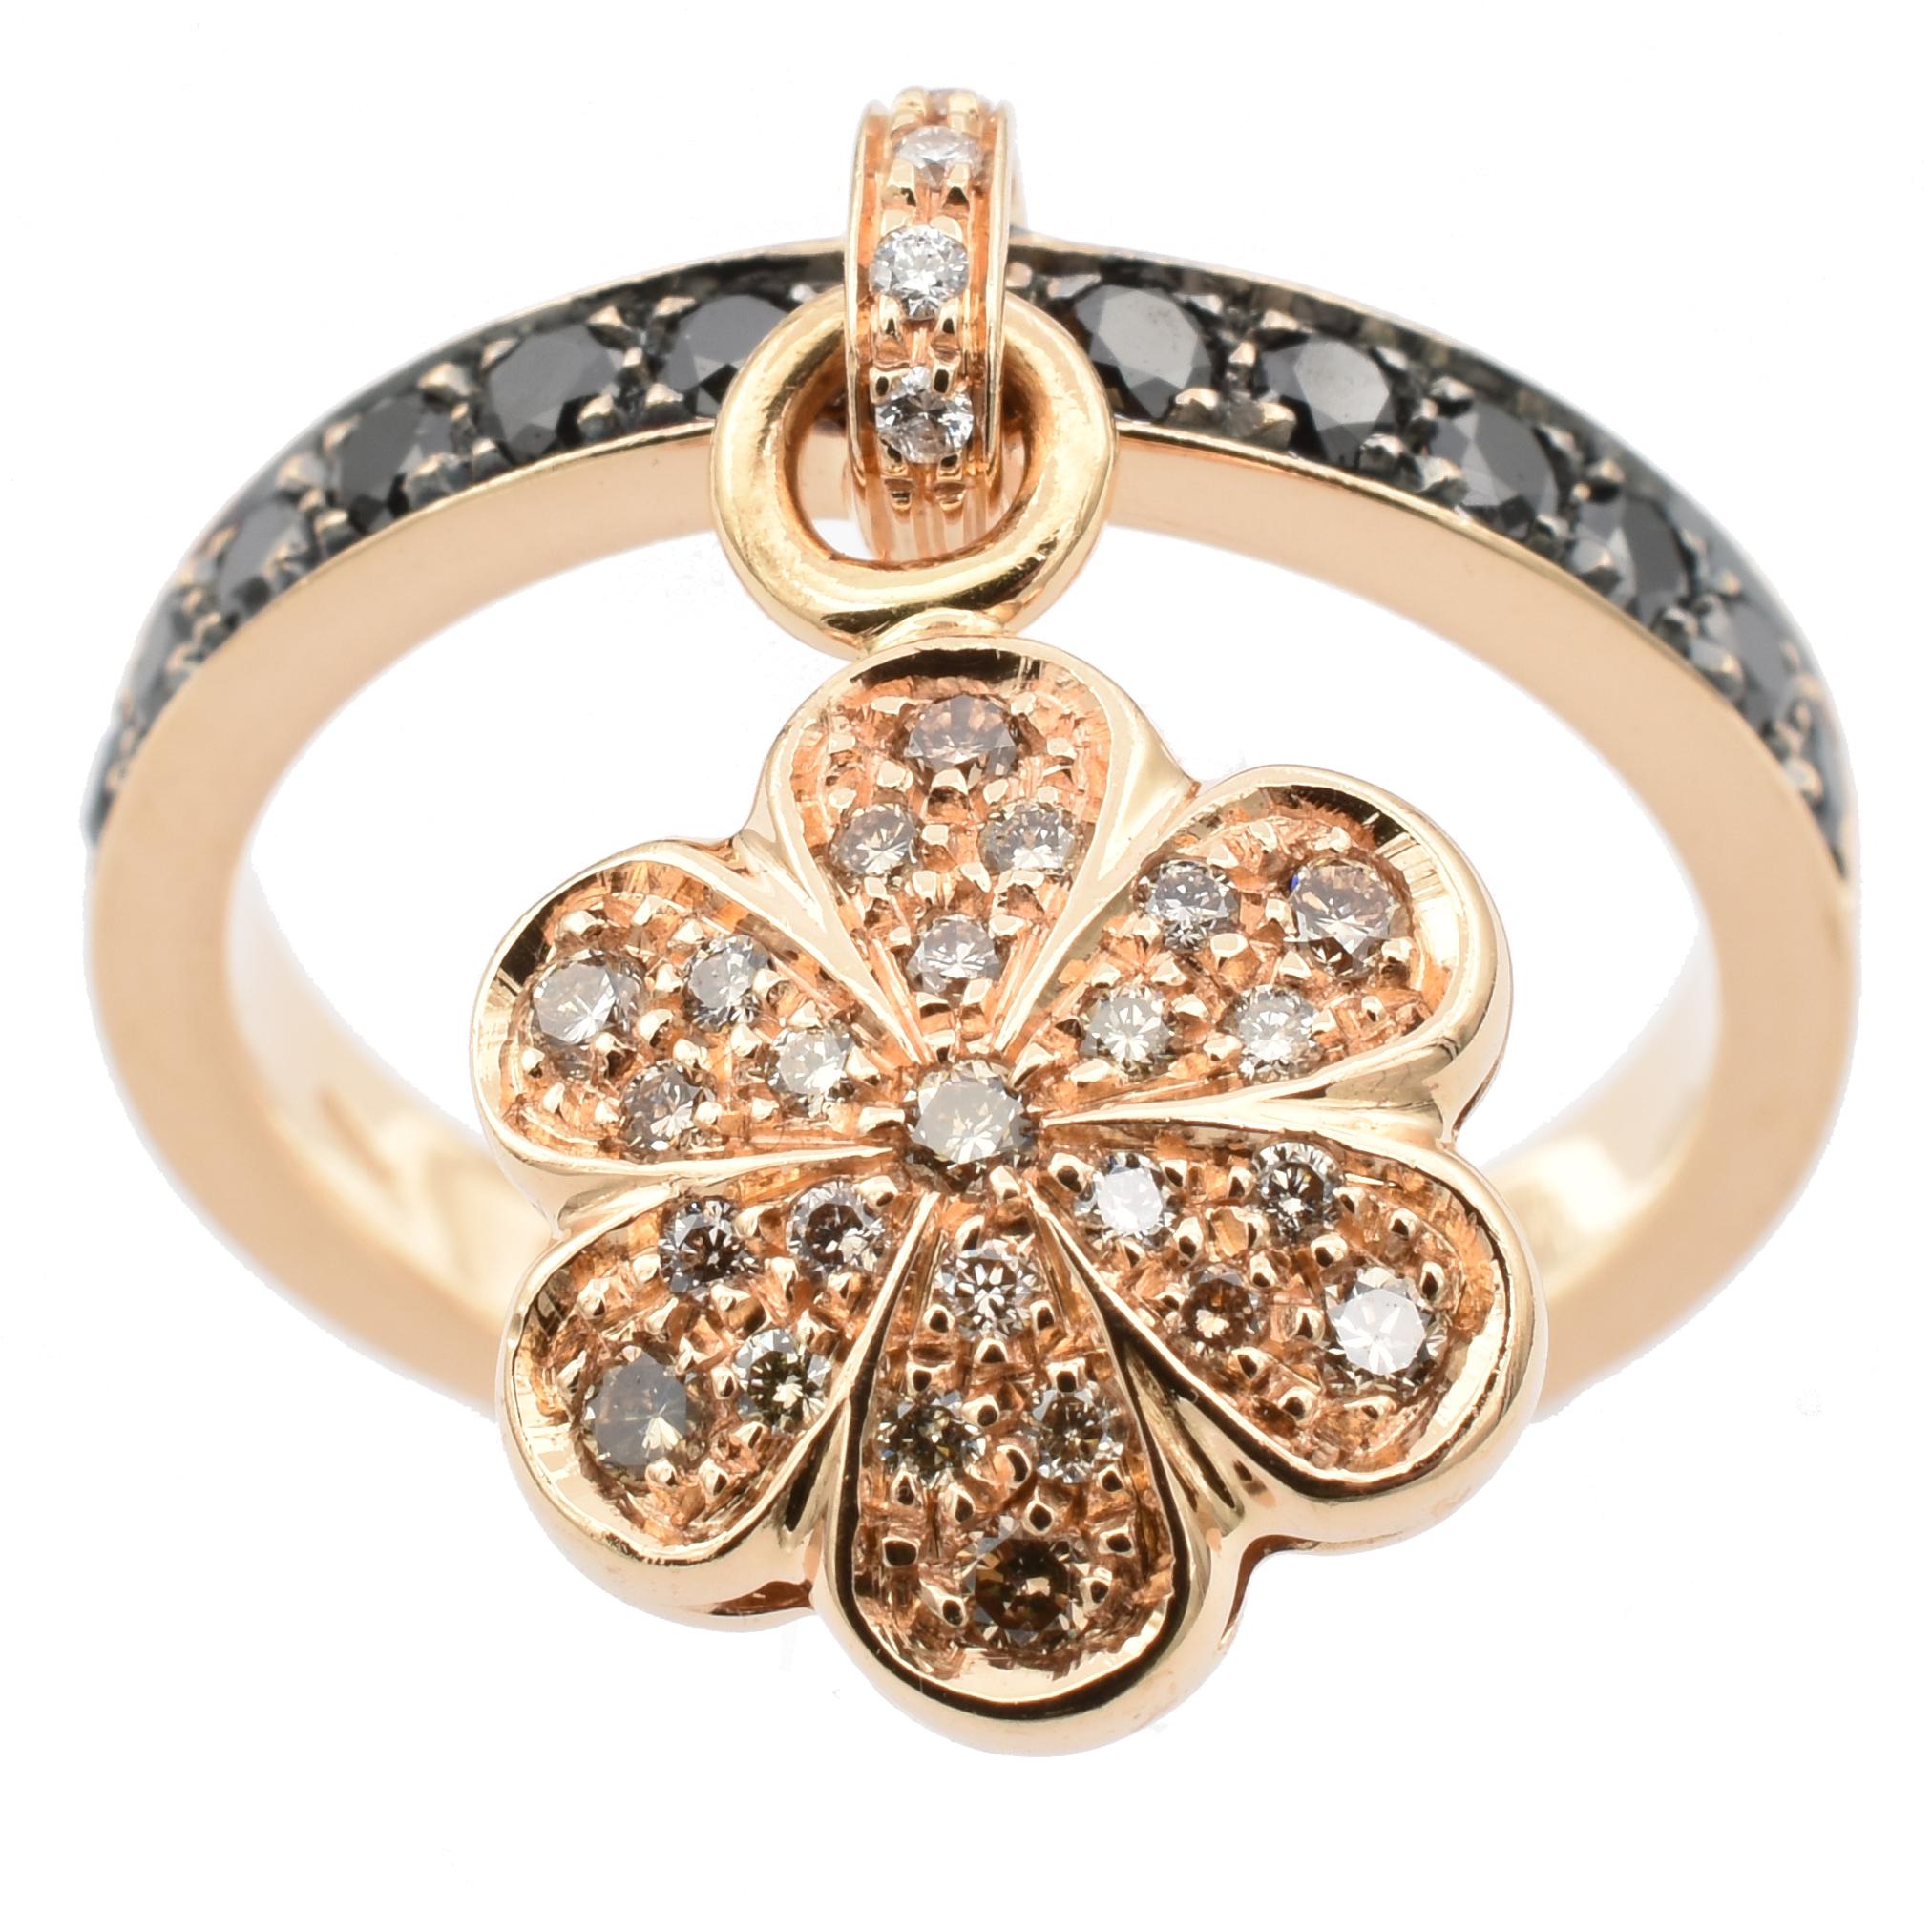 18 Kt Rose Gold Ring with Pendant Flower Charm. This Charm is set in both sides with Champagne Diamonds and hangs freely on the ring.
A very Funny and Happy Ring that perfectly match with a wedding ring for an everyday use.
Handmade in Italy in or